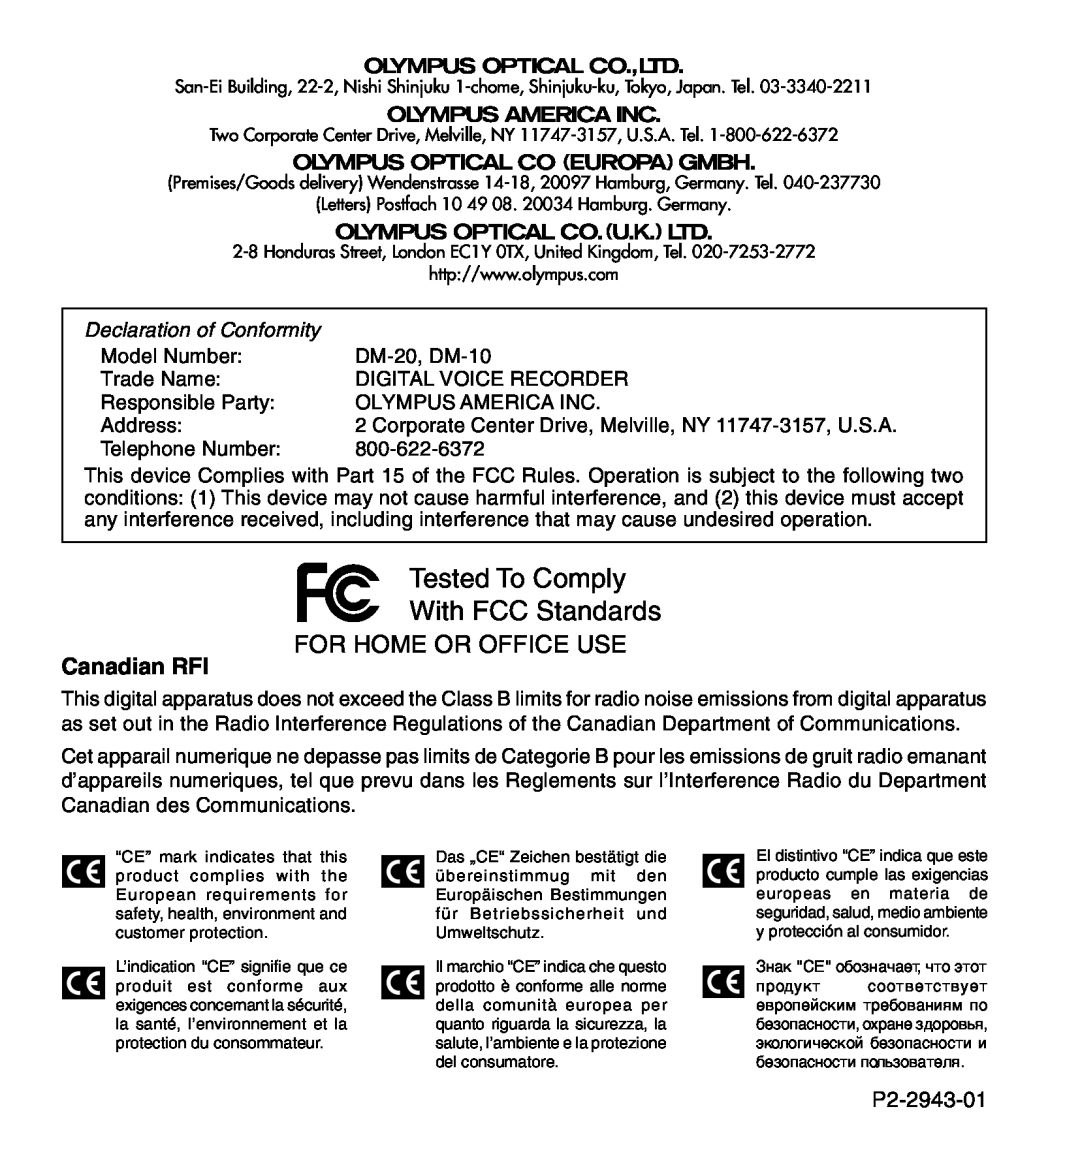 Olympus DM-20, DM-10 Canadian RFI, Tested To Comply With FCC Standards, For Home Or Office Use, Declaration of Conformity 